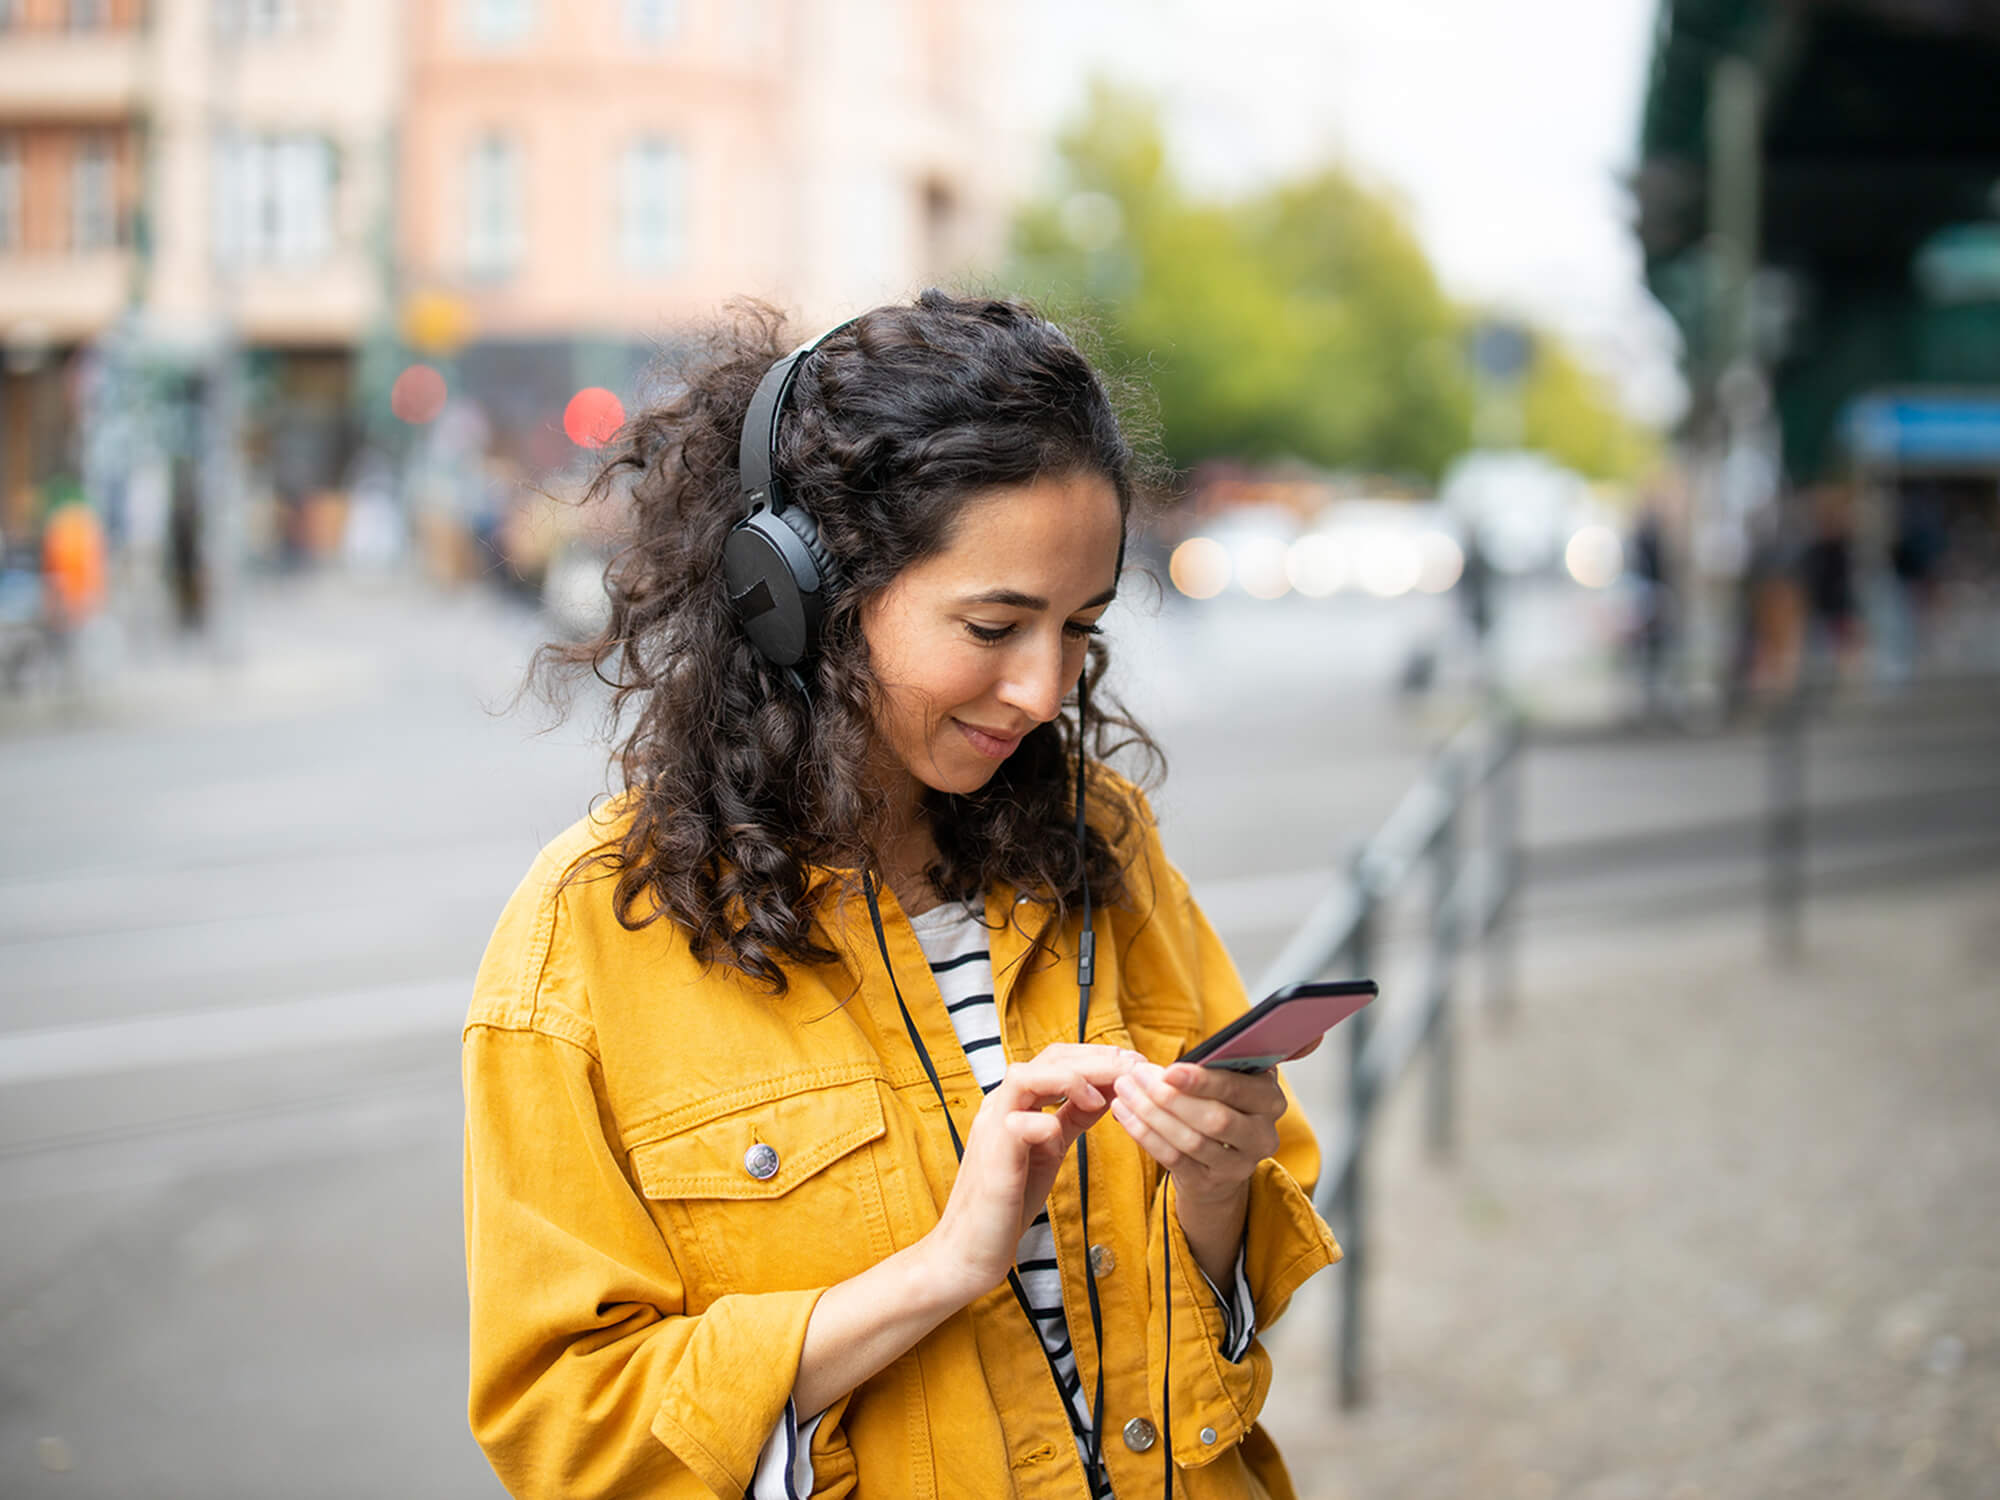 Woman listening to music with headphones in a city, photo by Luis Alvarez/Getty Images